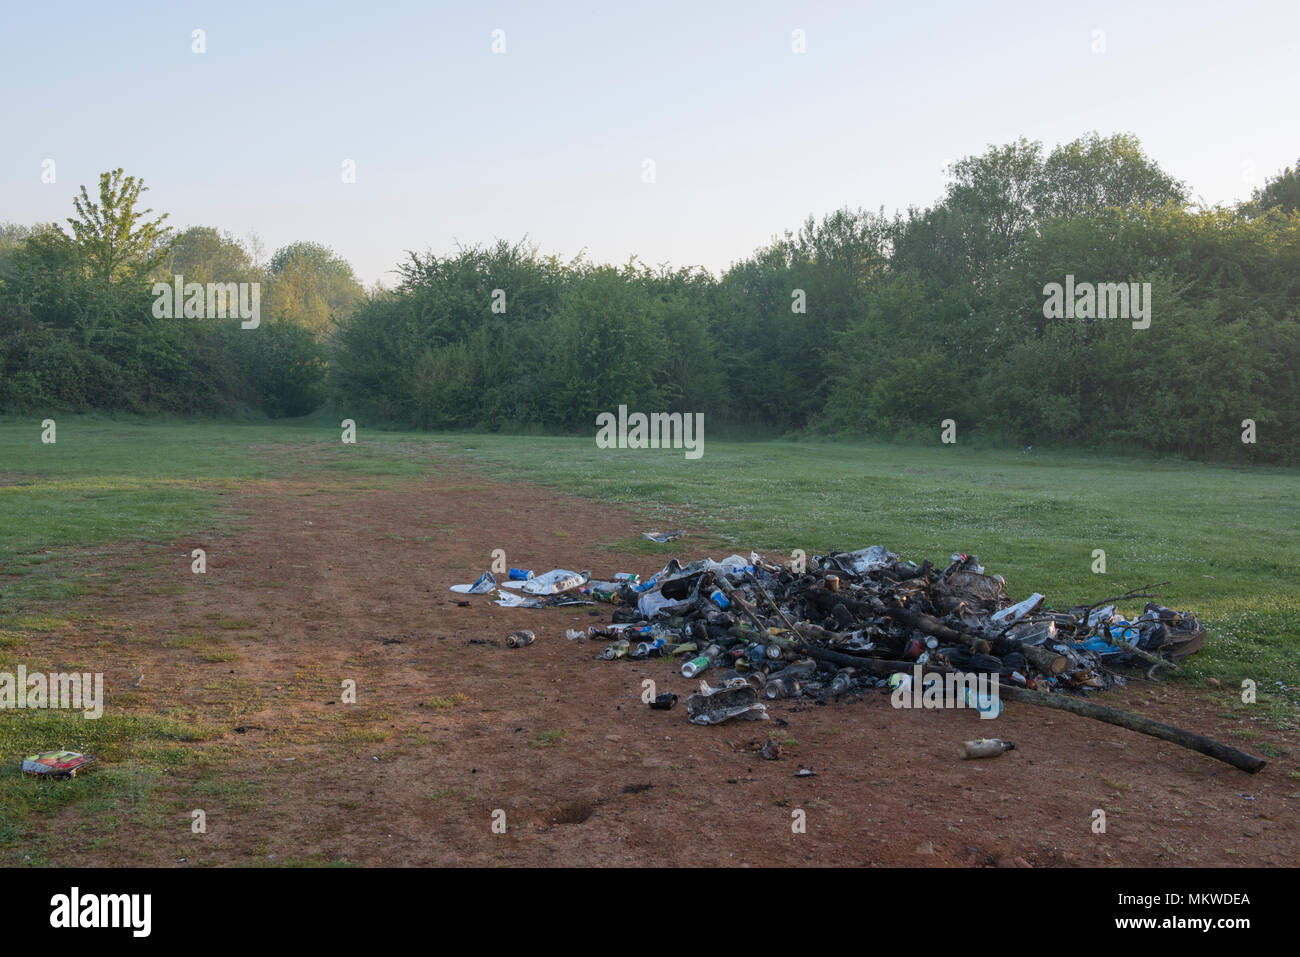 Rubbish and litter left behind after a May Day Bank Holiday at Blue Lagoon Nature Reserve, Bletchley, Bucks. Image taken on 8th May 2018 Stock Photo